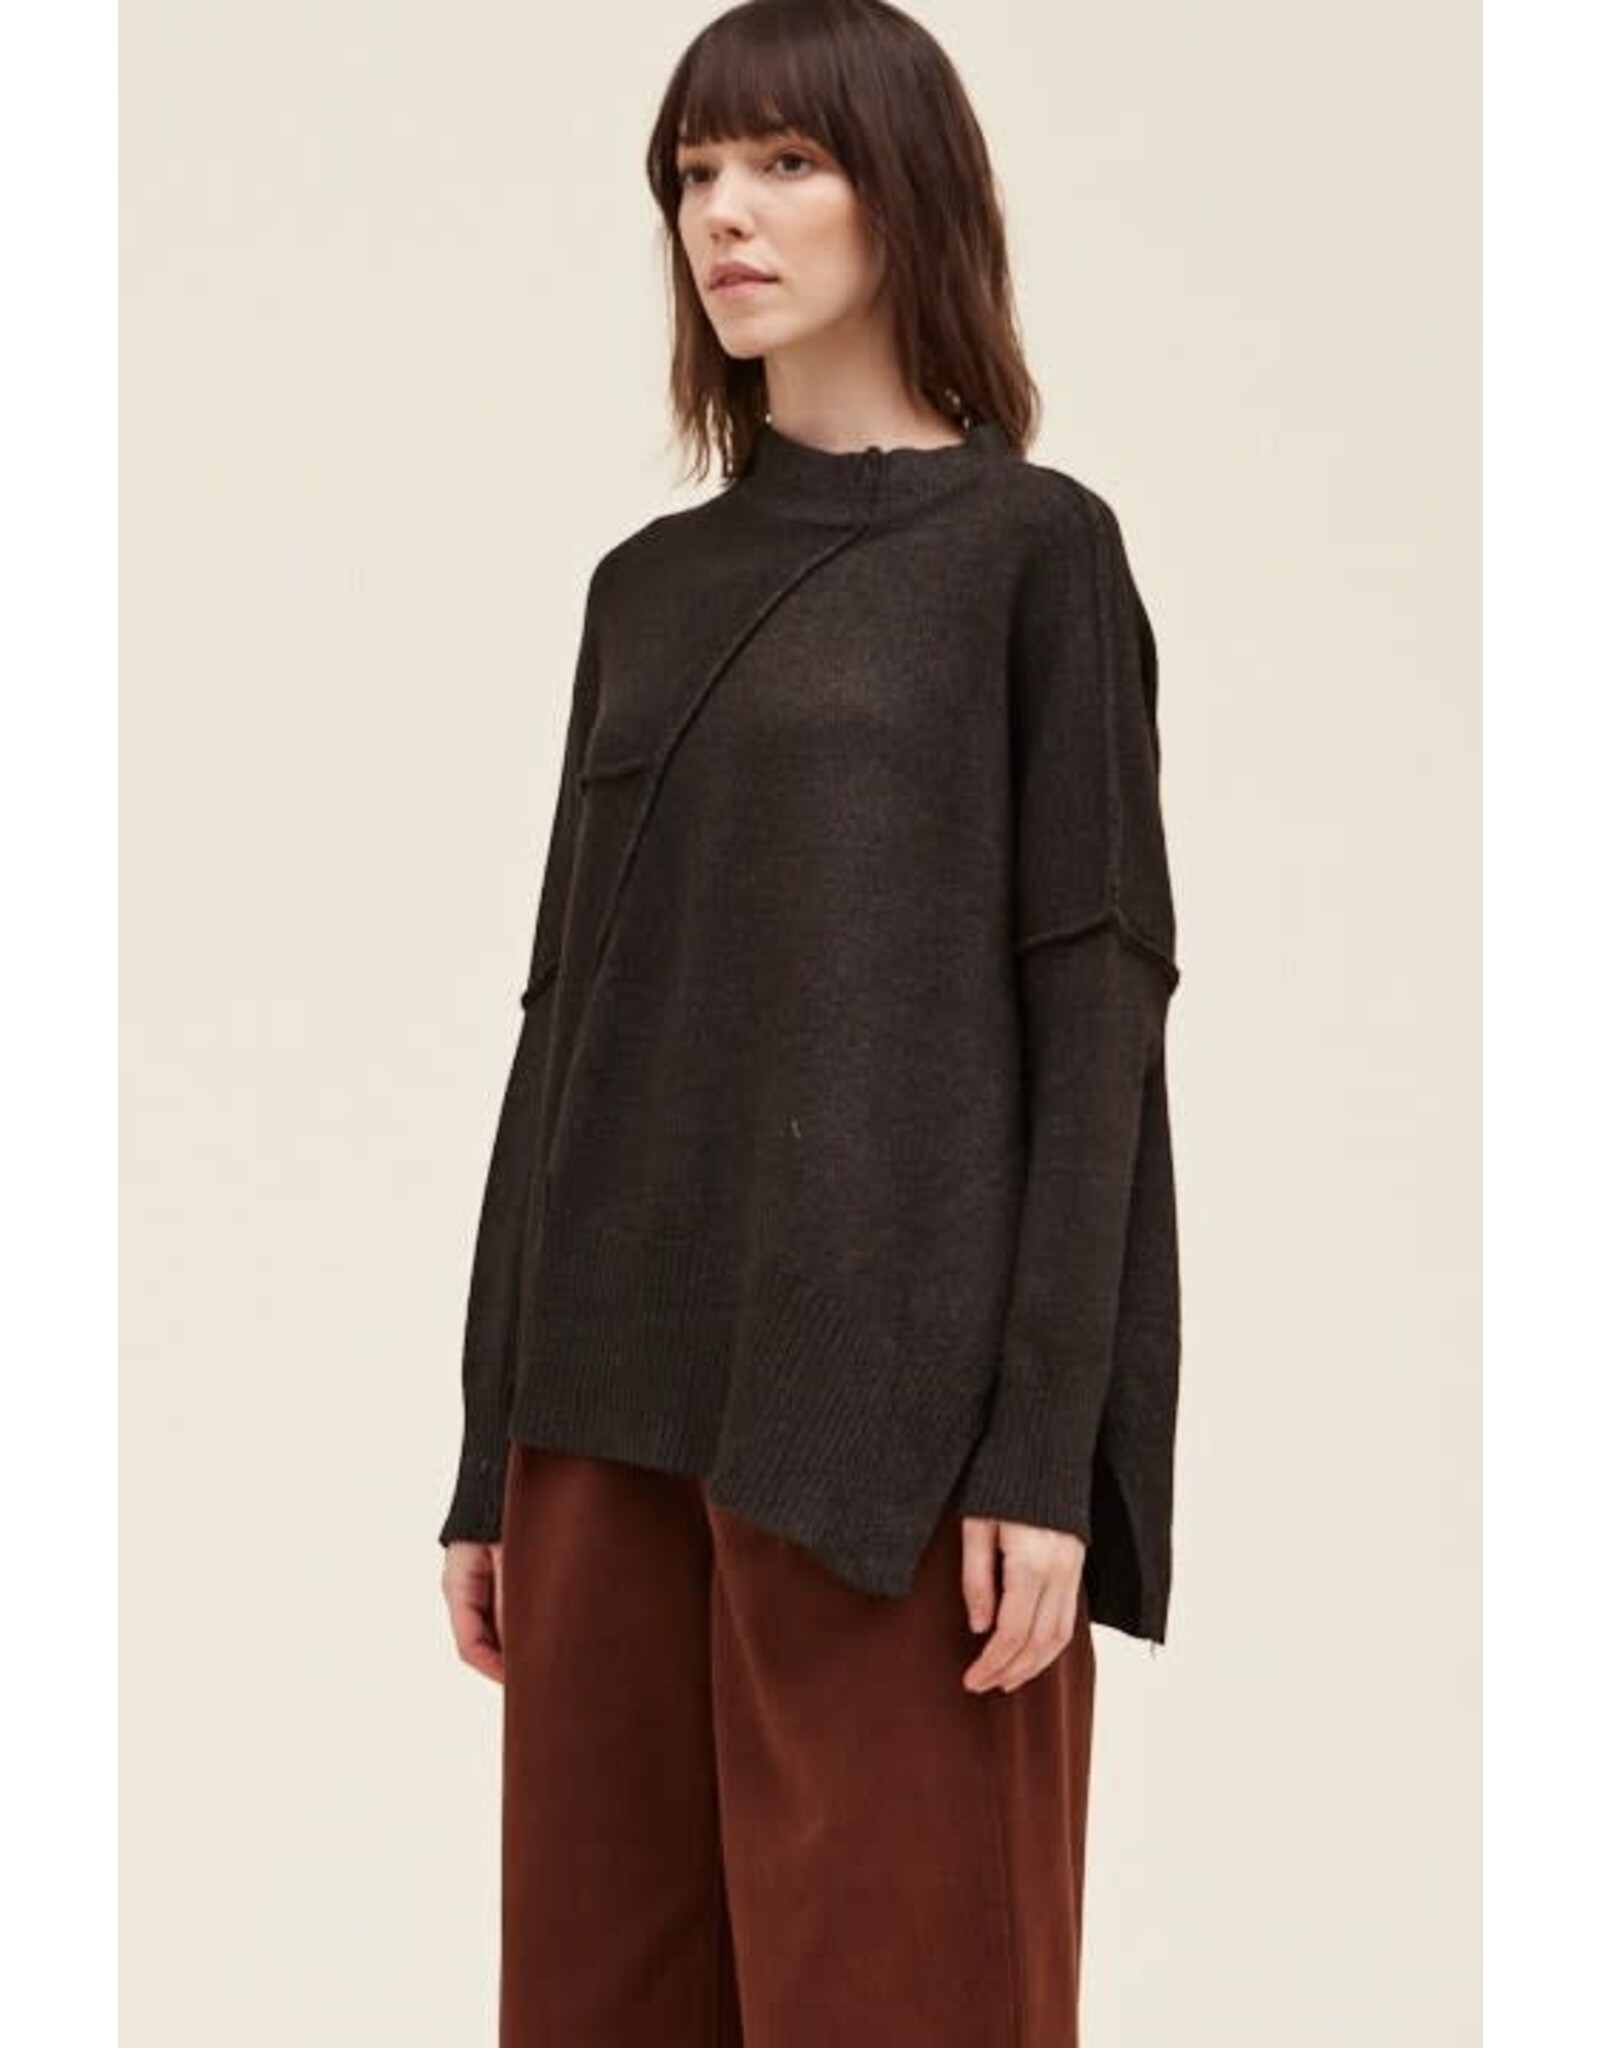 Grade and Gather Asymmetrical Side Slit Sweater